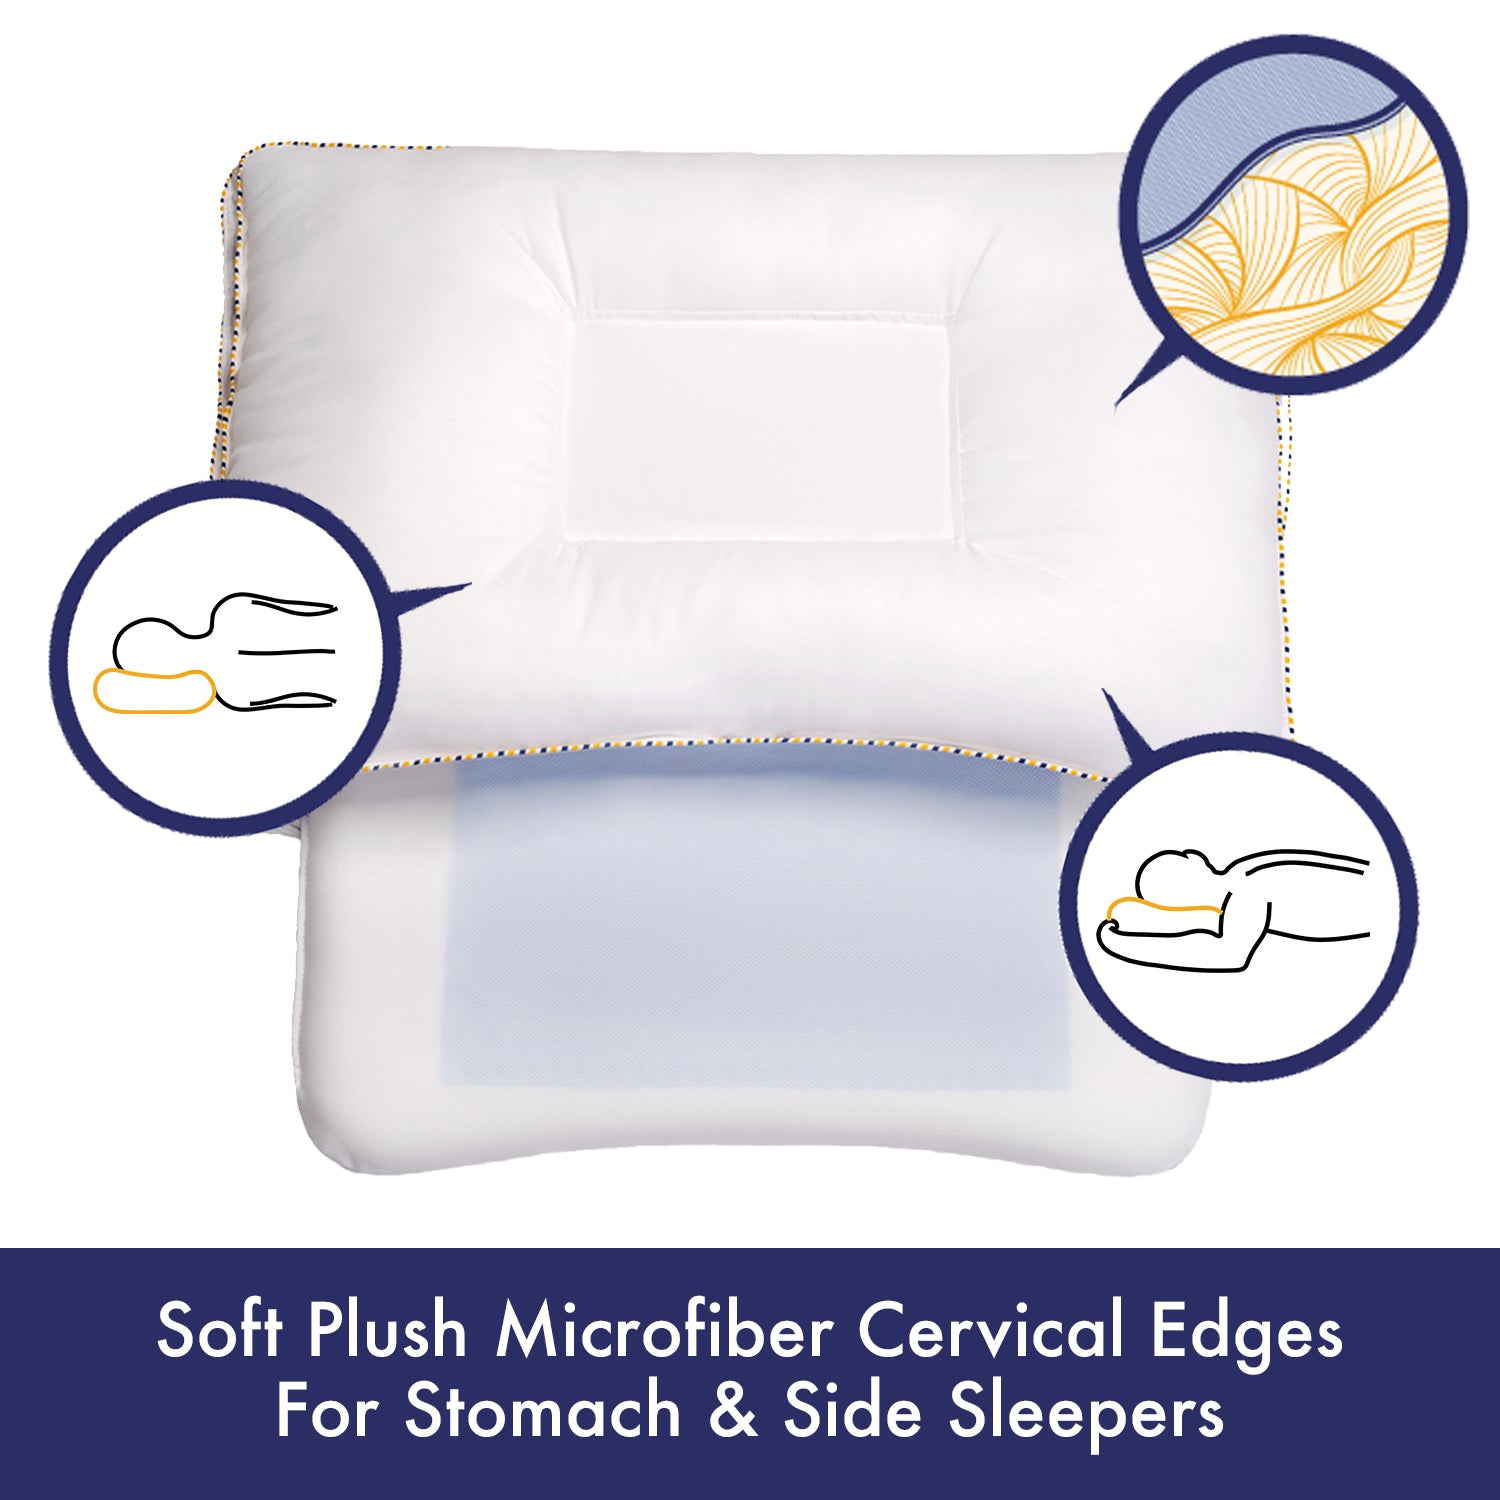 Noggin & Wink Dual Sided Cervical Pillow, Ventilated Memory Foam and Soft Microfiber for Back Sleeper Side Sleeper Stomach Sleeper - Premium Doctor Recommended Hypoallergenic Down Alternative Pillow